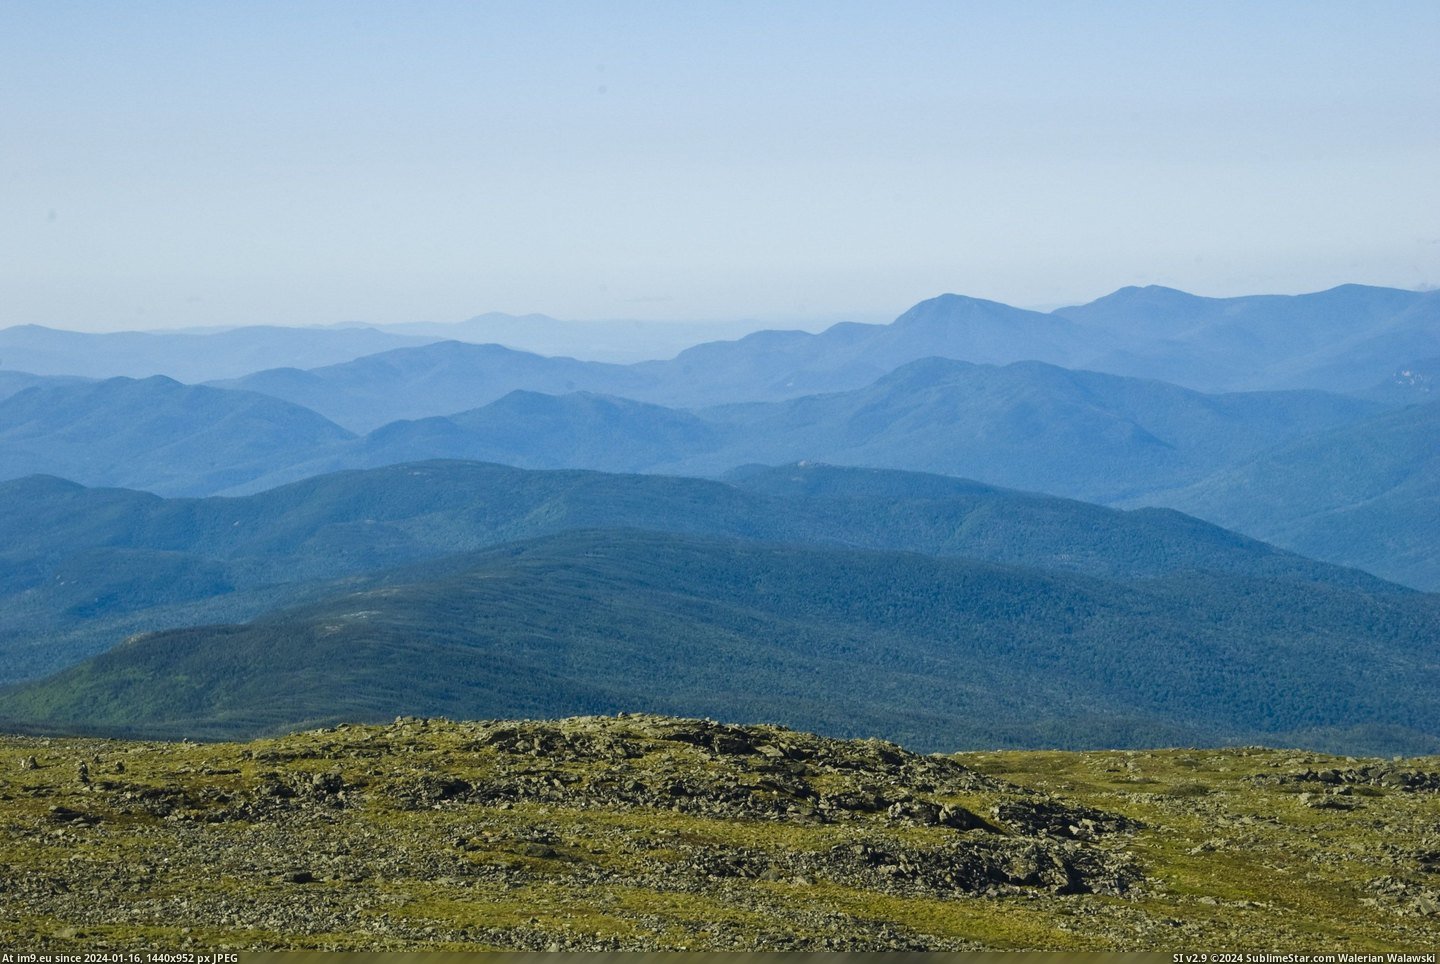 #Distance #Mount #Rare #Summit #Judge #3008x2000 #Washington #Range #Mile [Earthporn] The rare 100-mile view from the summit of Mount Washington, NH [3008x2000]- (they judge distance by which range you  Pic. (Bild von album My r/EARTHPORN favs))